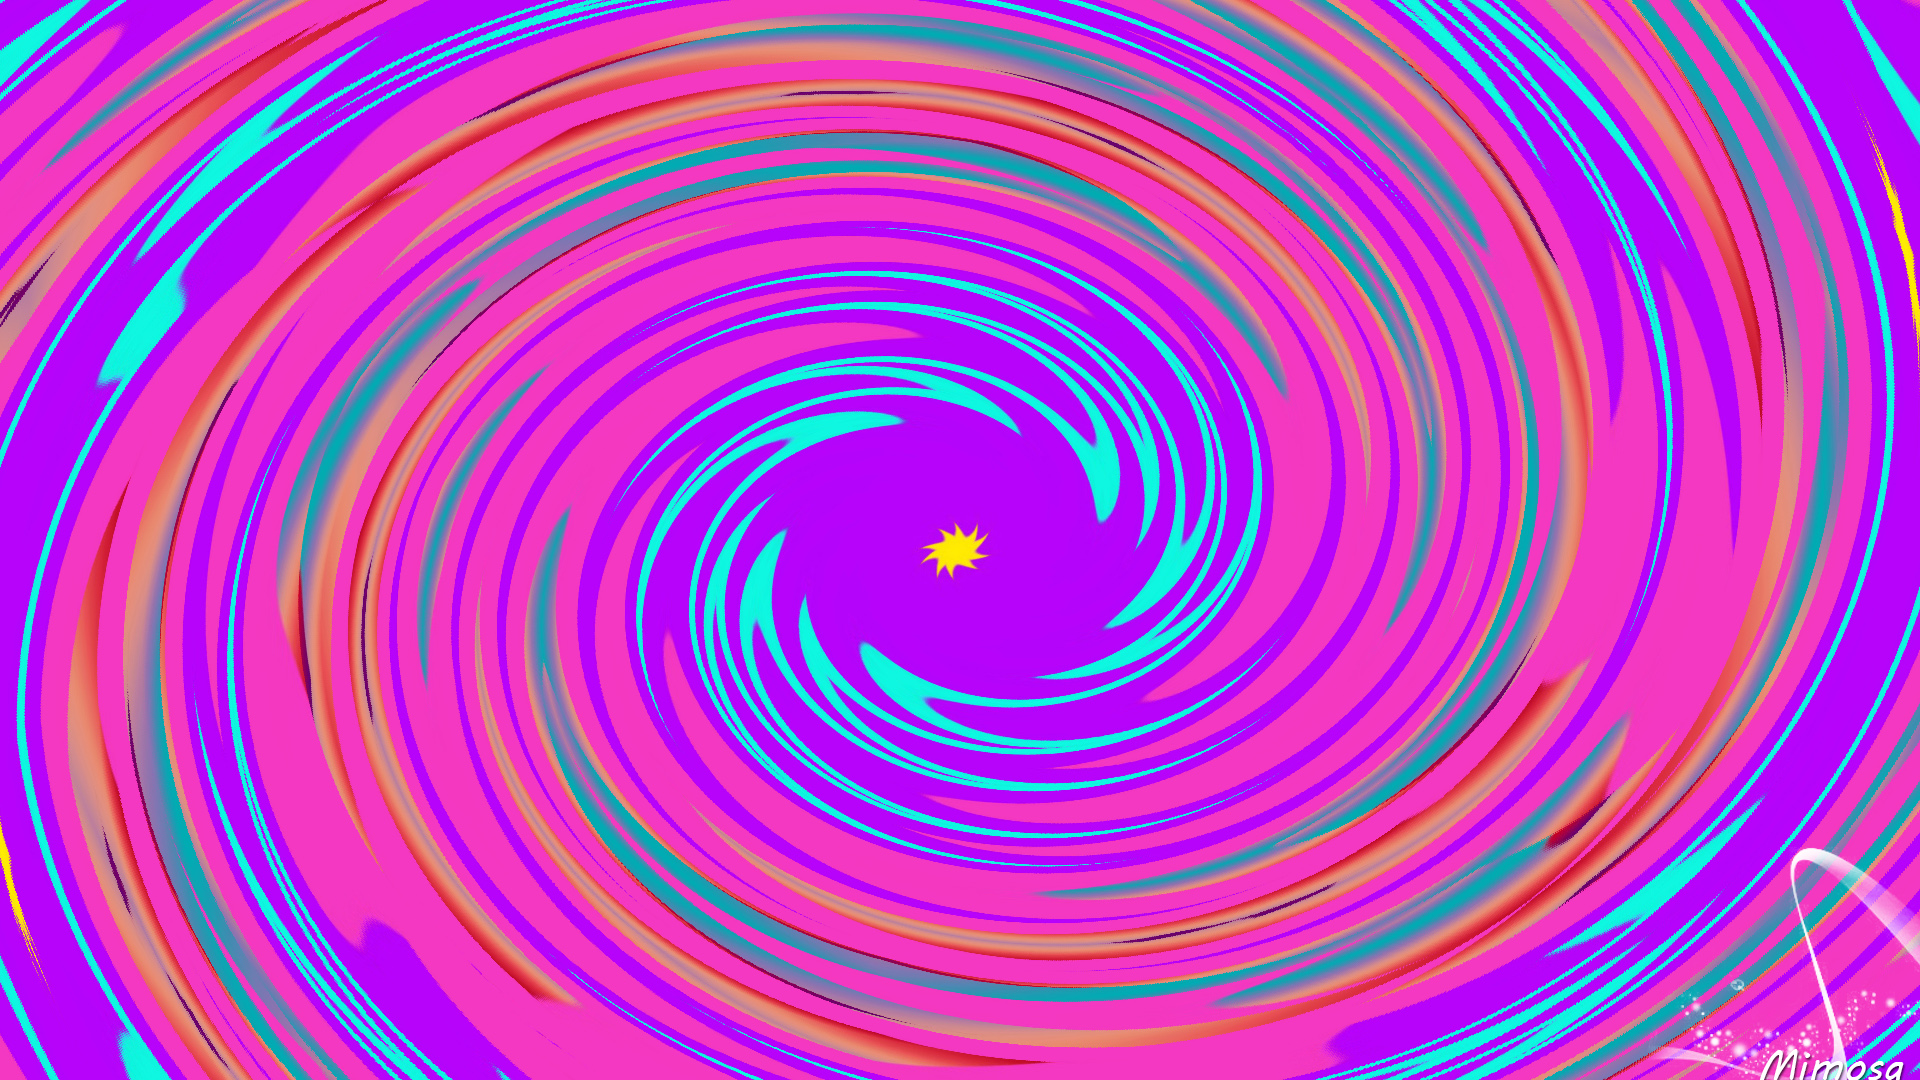 Abstract Colorful Colors Digital Art Swirl 1920x1080